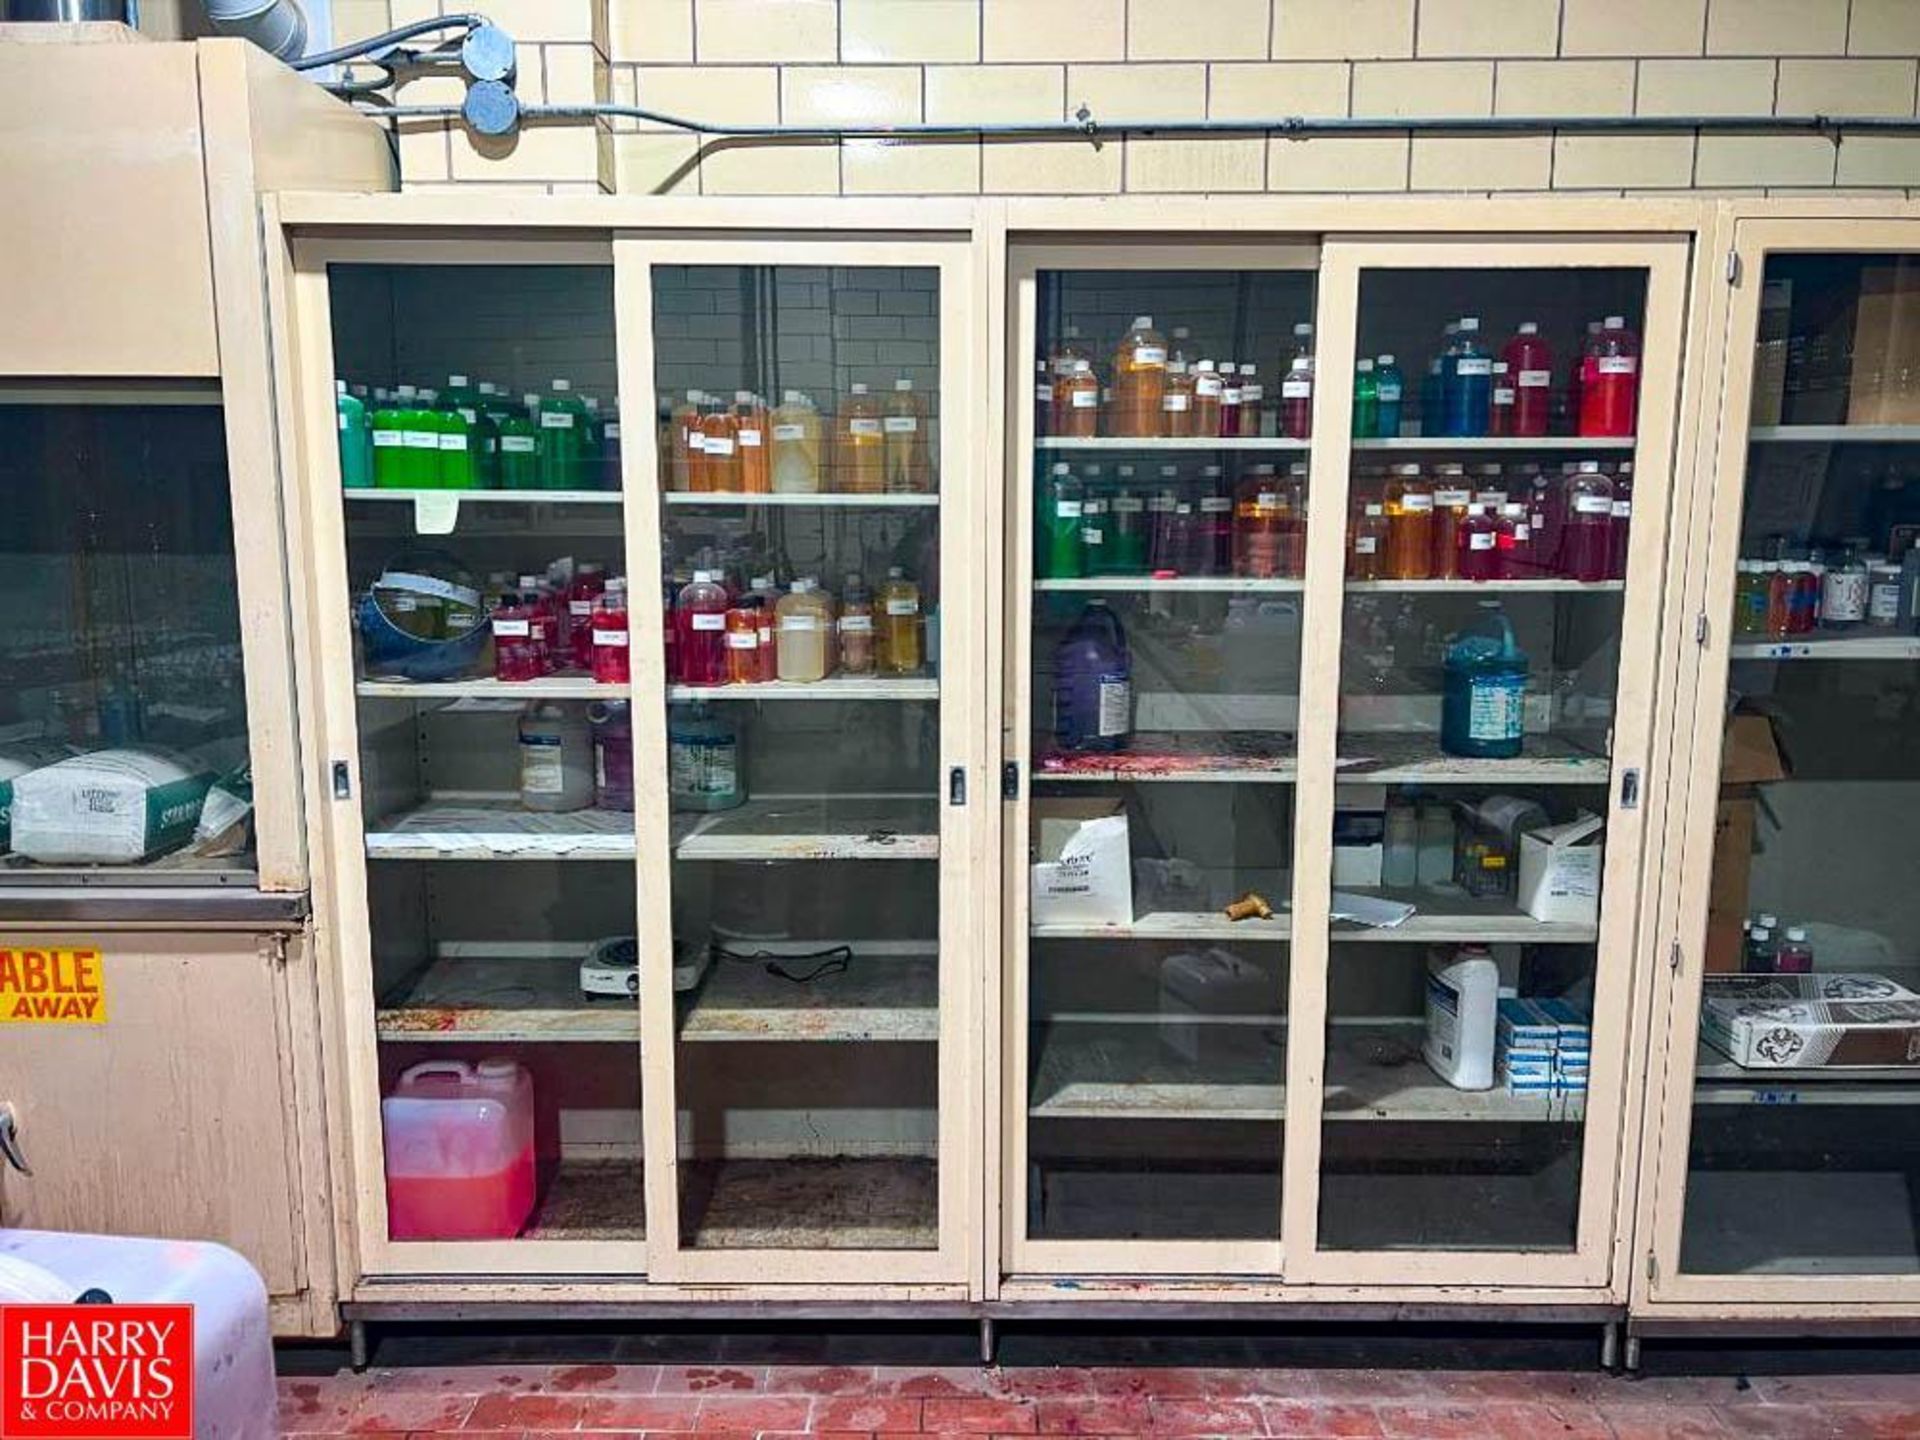 Glass Front Cabinets (Contents Not Included) - Image 2 of 2